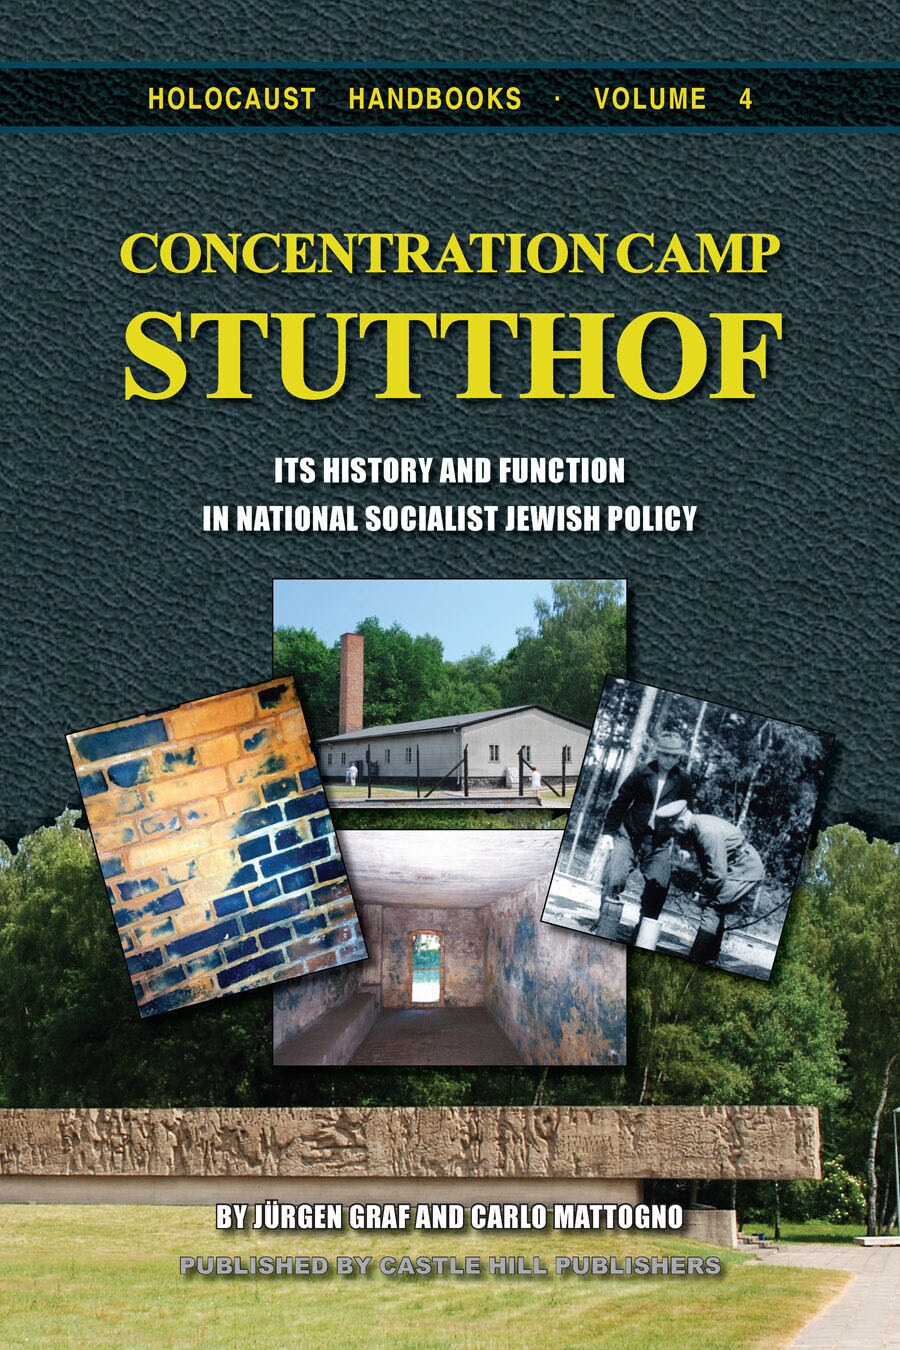 Concentration Camp Stutthof:  Its History and Function in National Socialist Jewish Policy